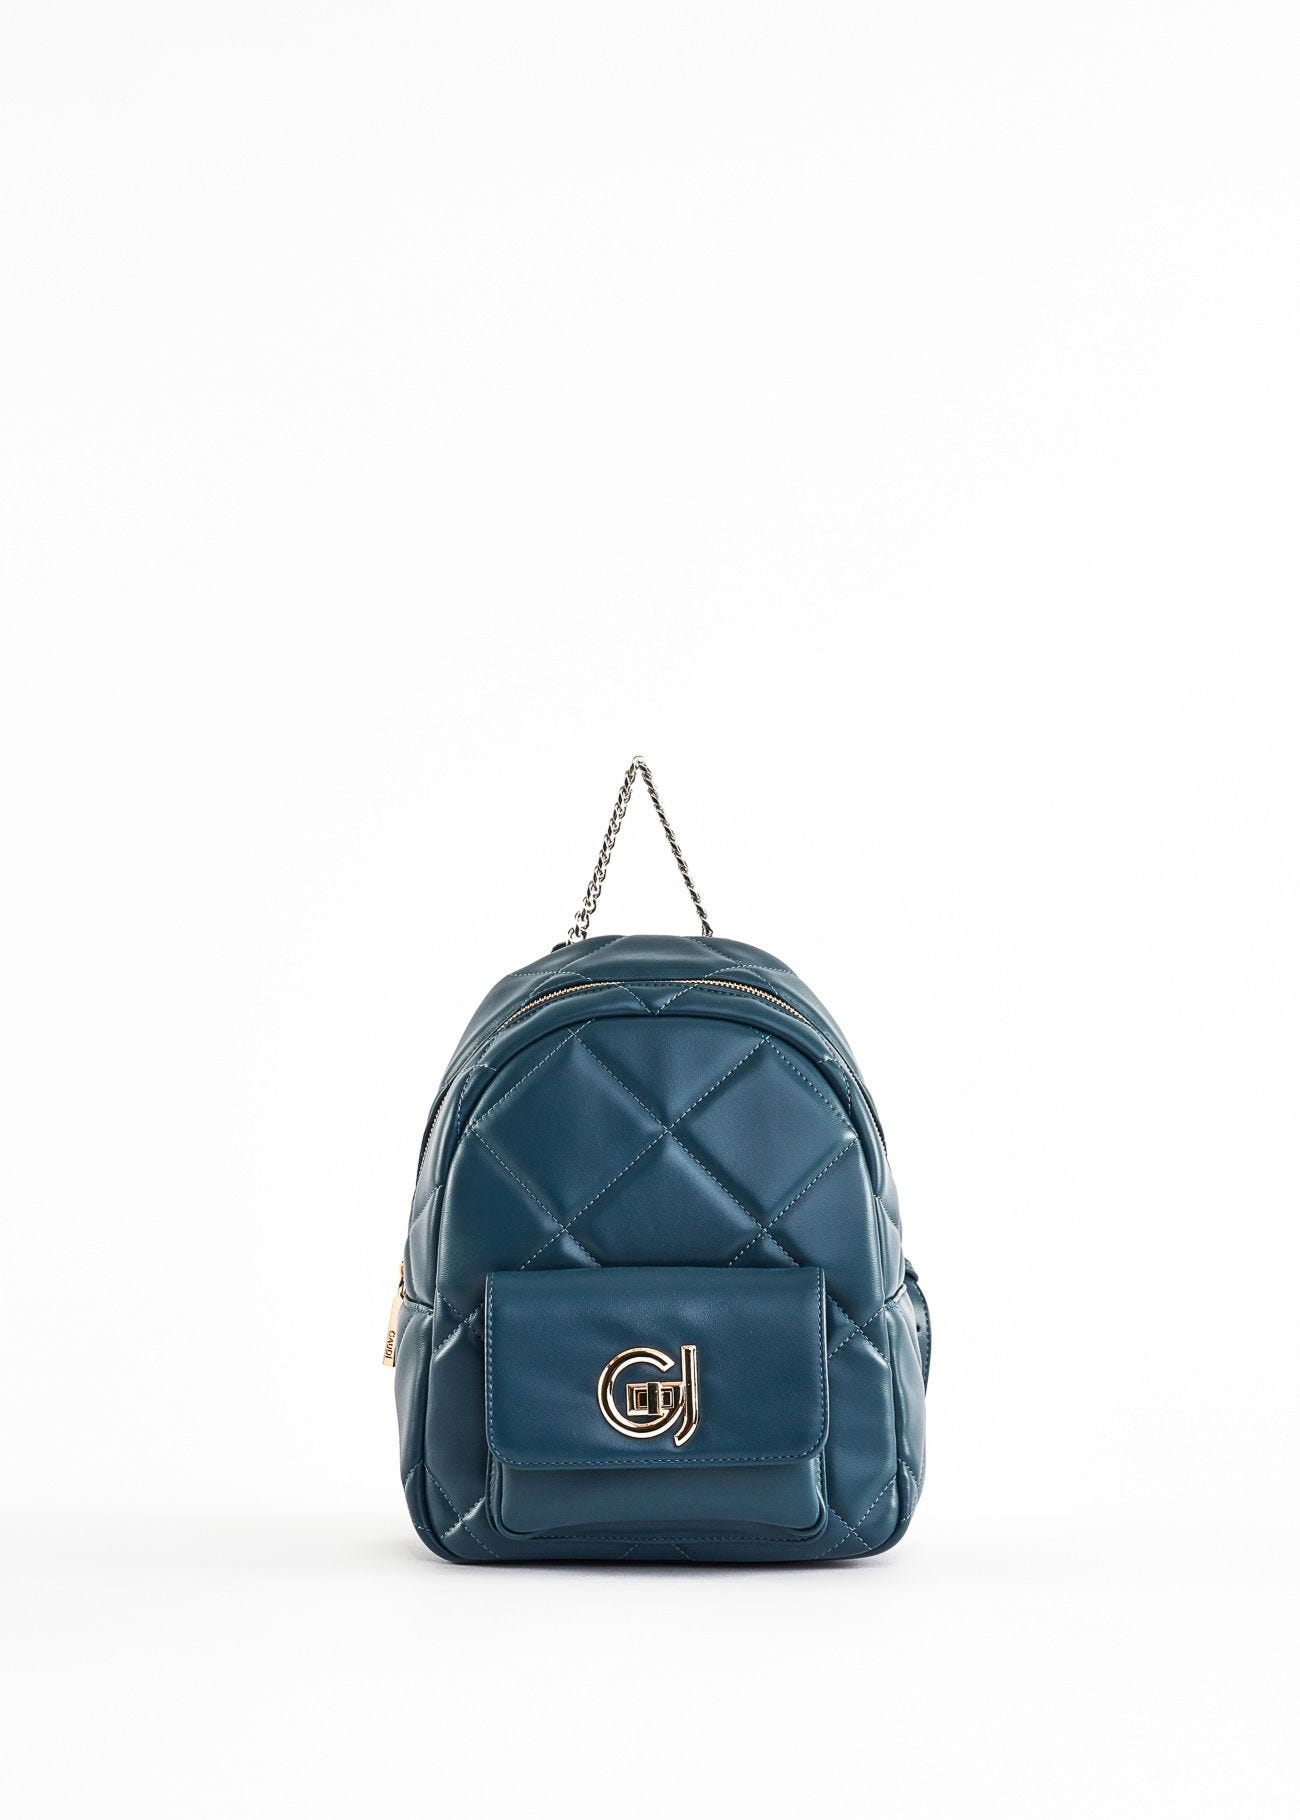 Backpack with GJ pattern